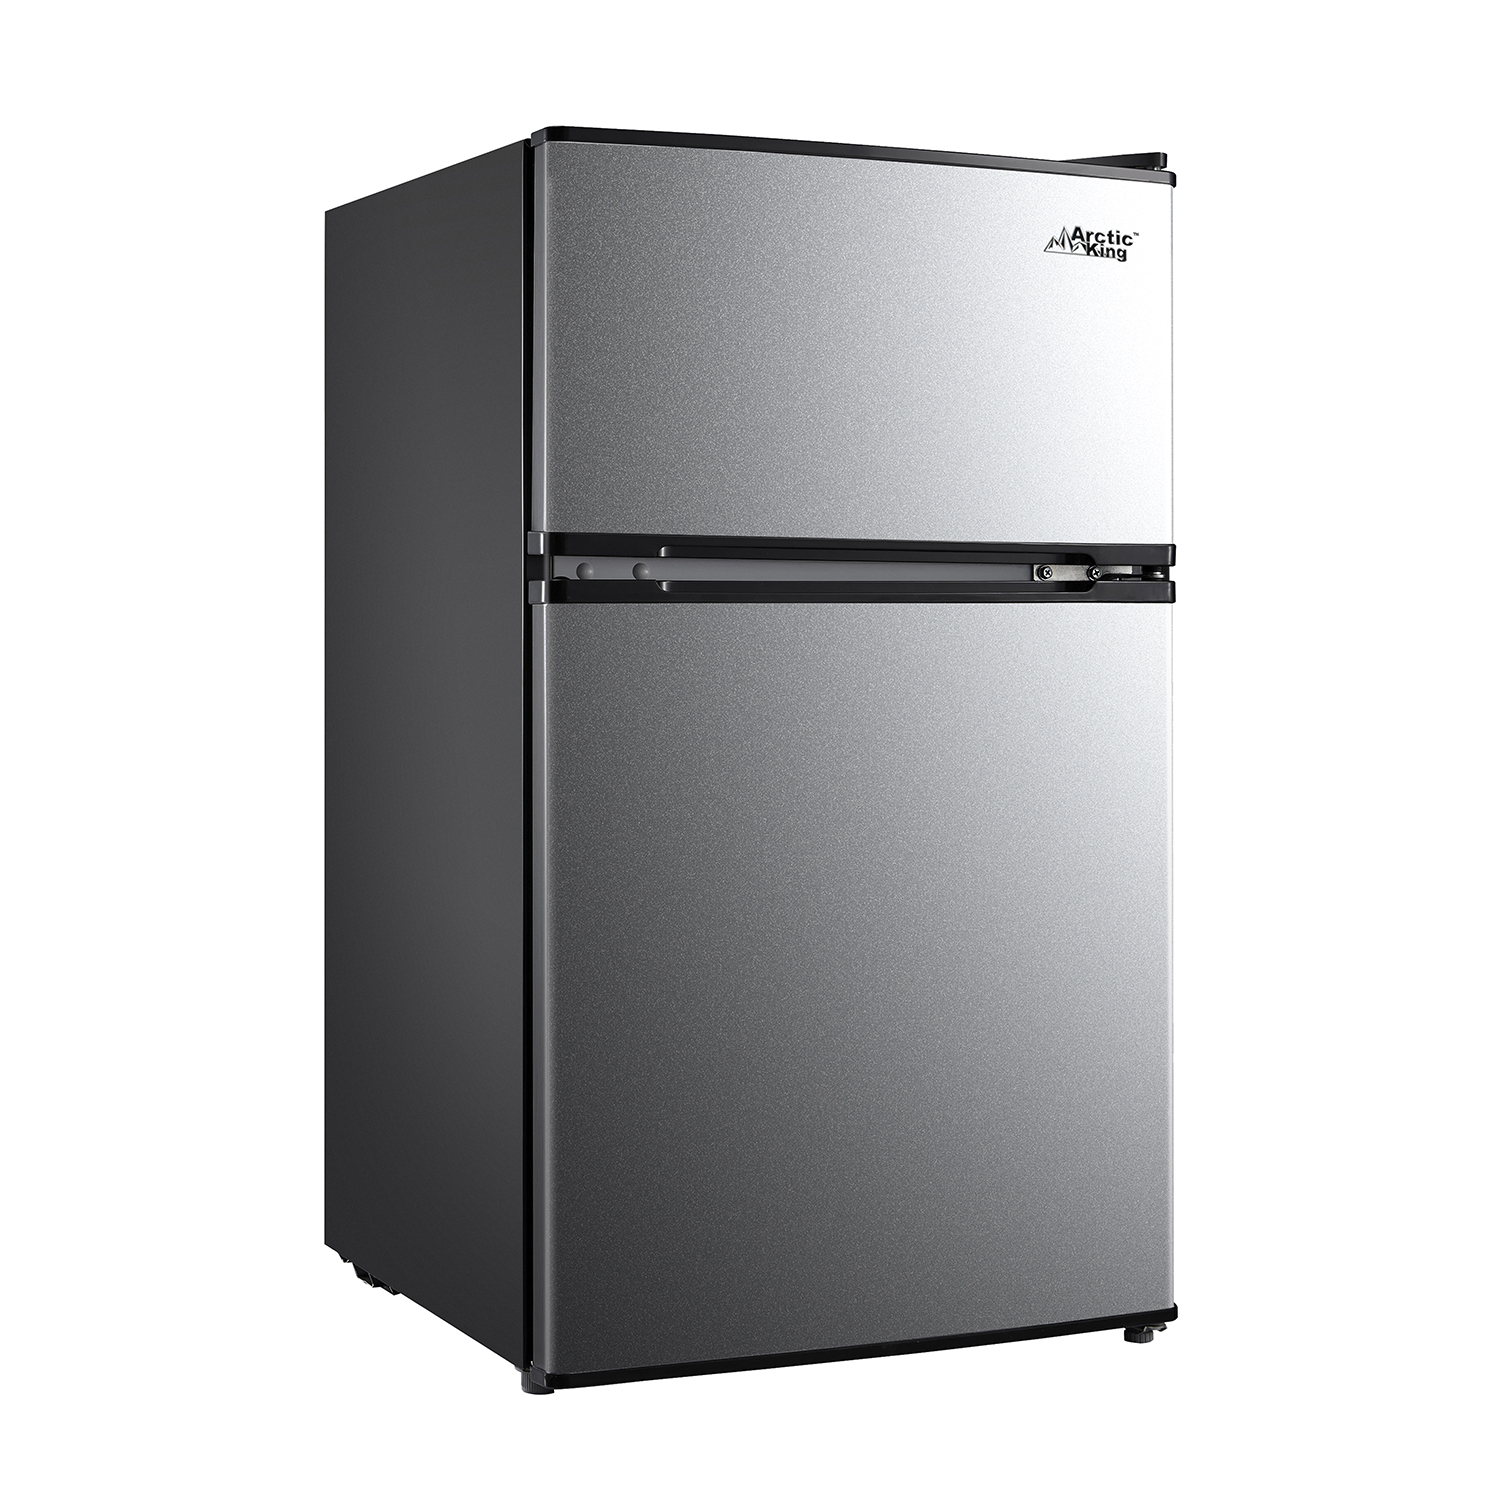 Arctic King 3.2 Cu ft Two Door Mini Fridge with Freezer, Stainless Steel, E-Star, ARM32D5ASL - image 3 of 21